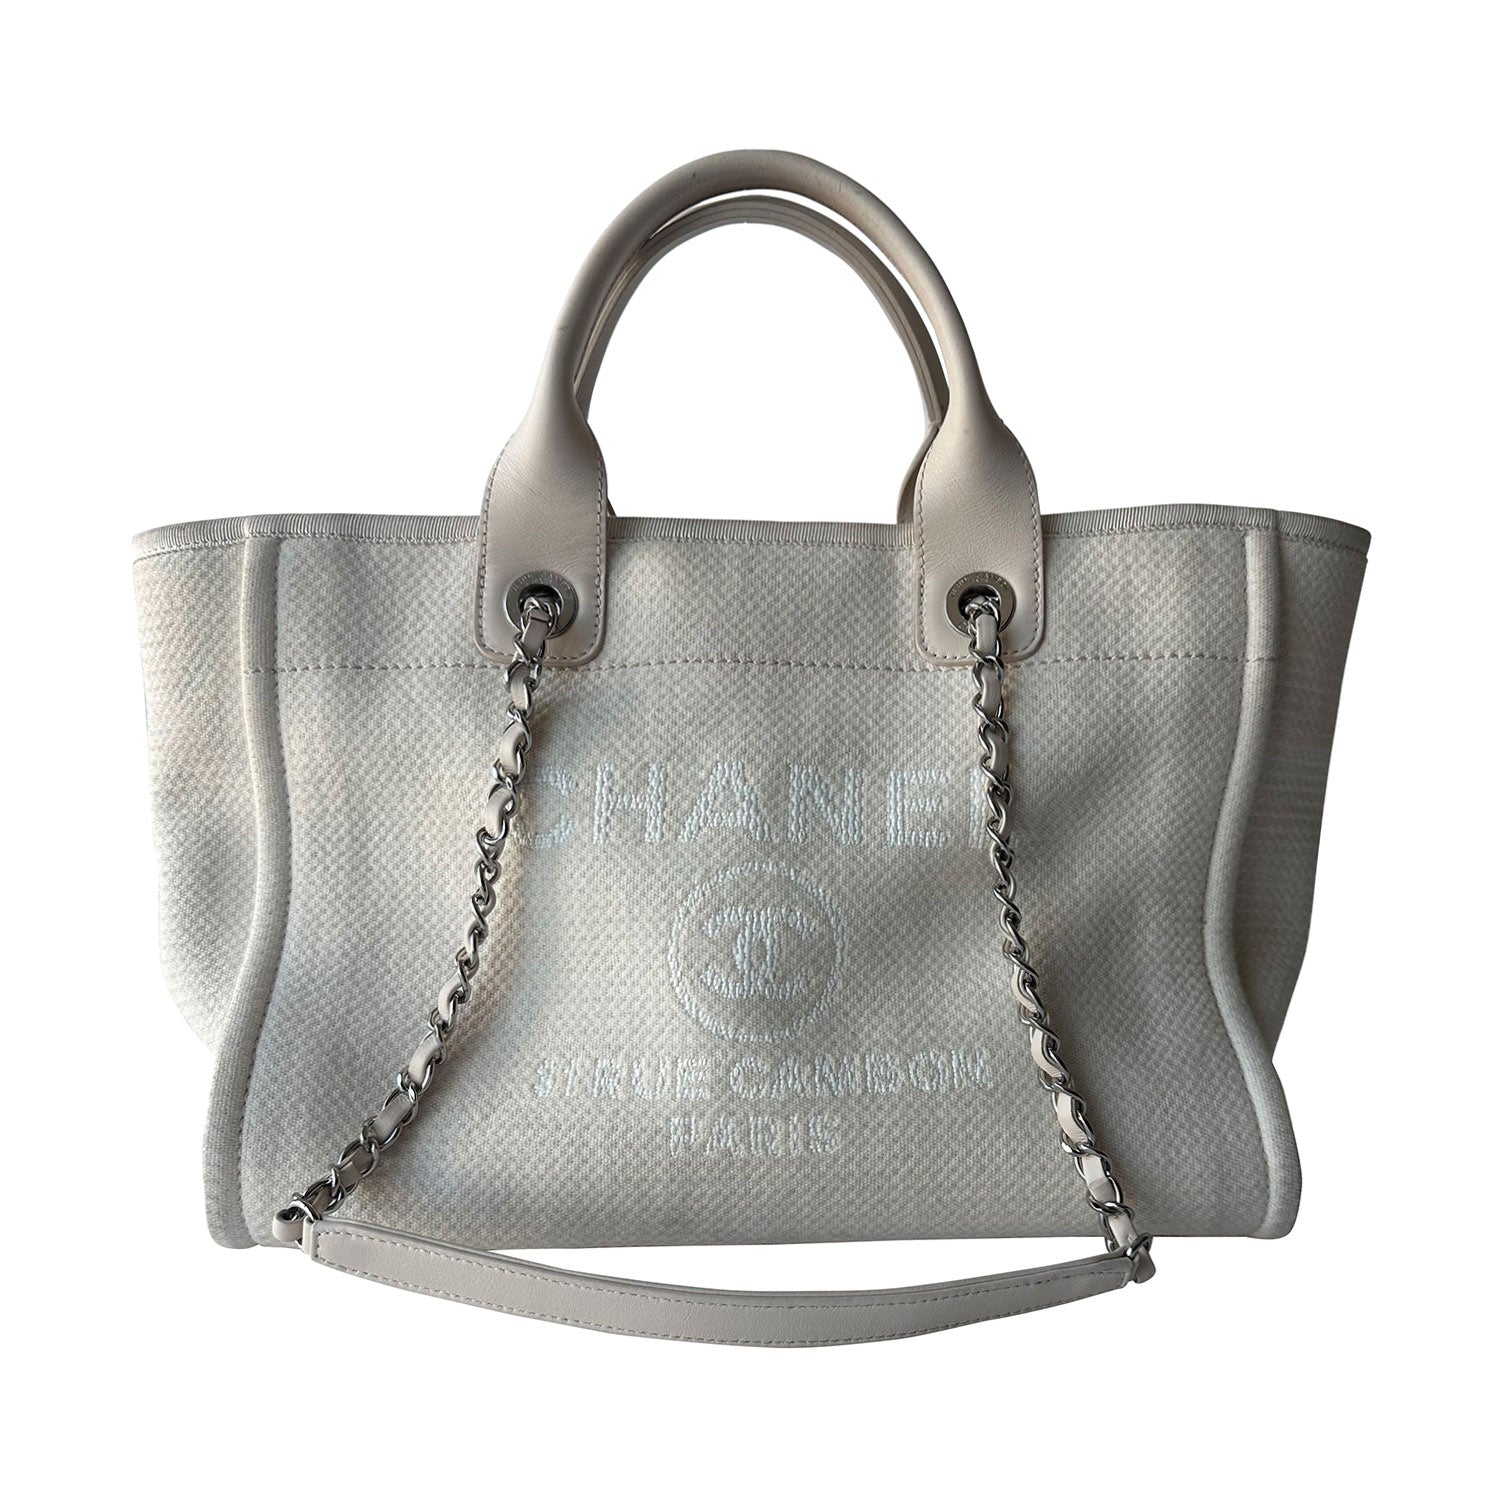 *HOT* Chanel Large Cream Canvas Deauville Tote Bag with Silver Hardware